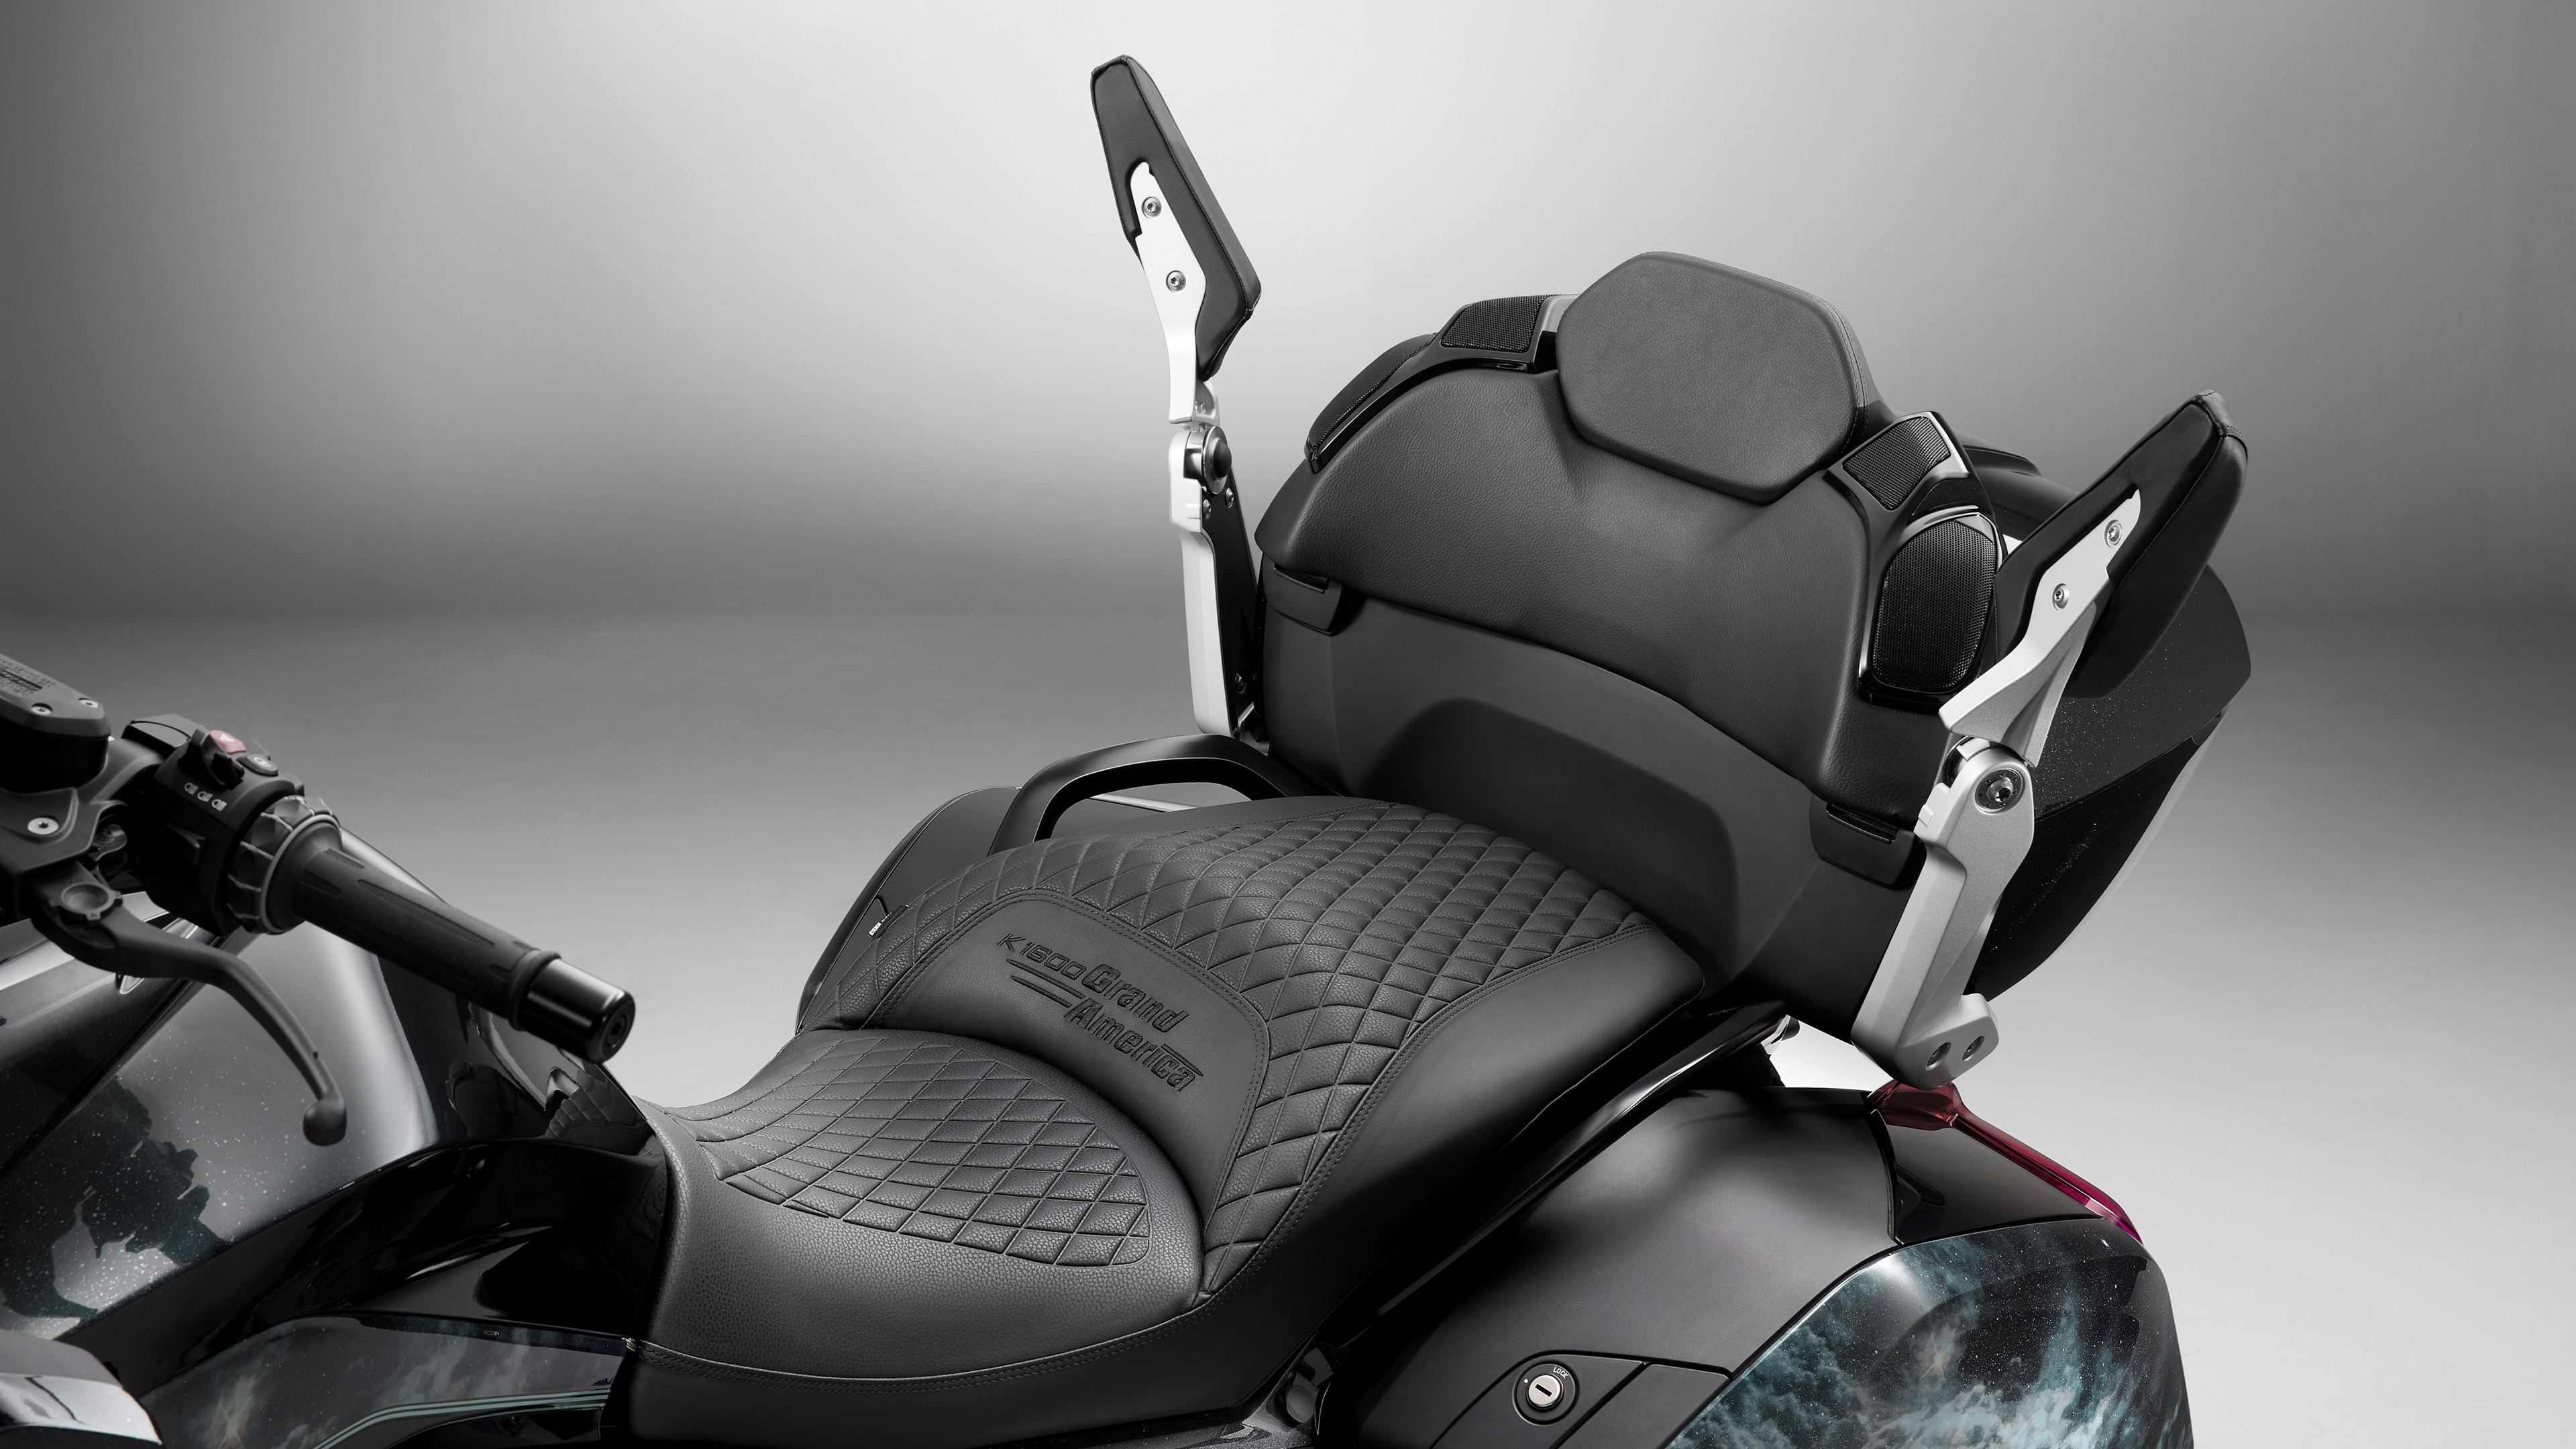 BMW K 1600 Grand America, Touring motorcycle, Comfortable ride, Advanced features, 3840x2160 4K Desktop